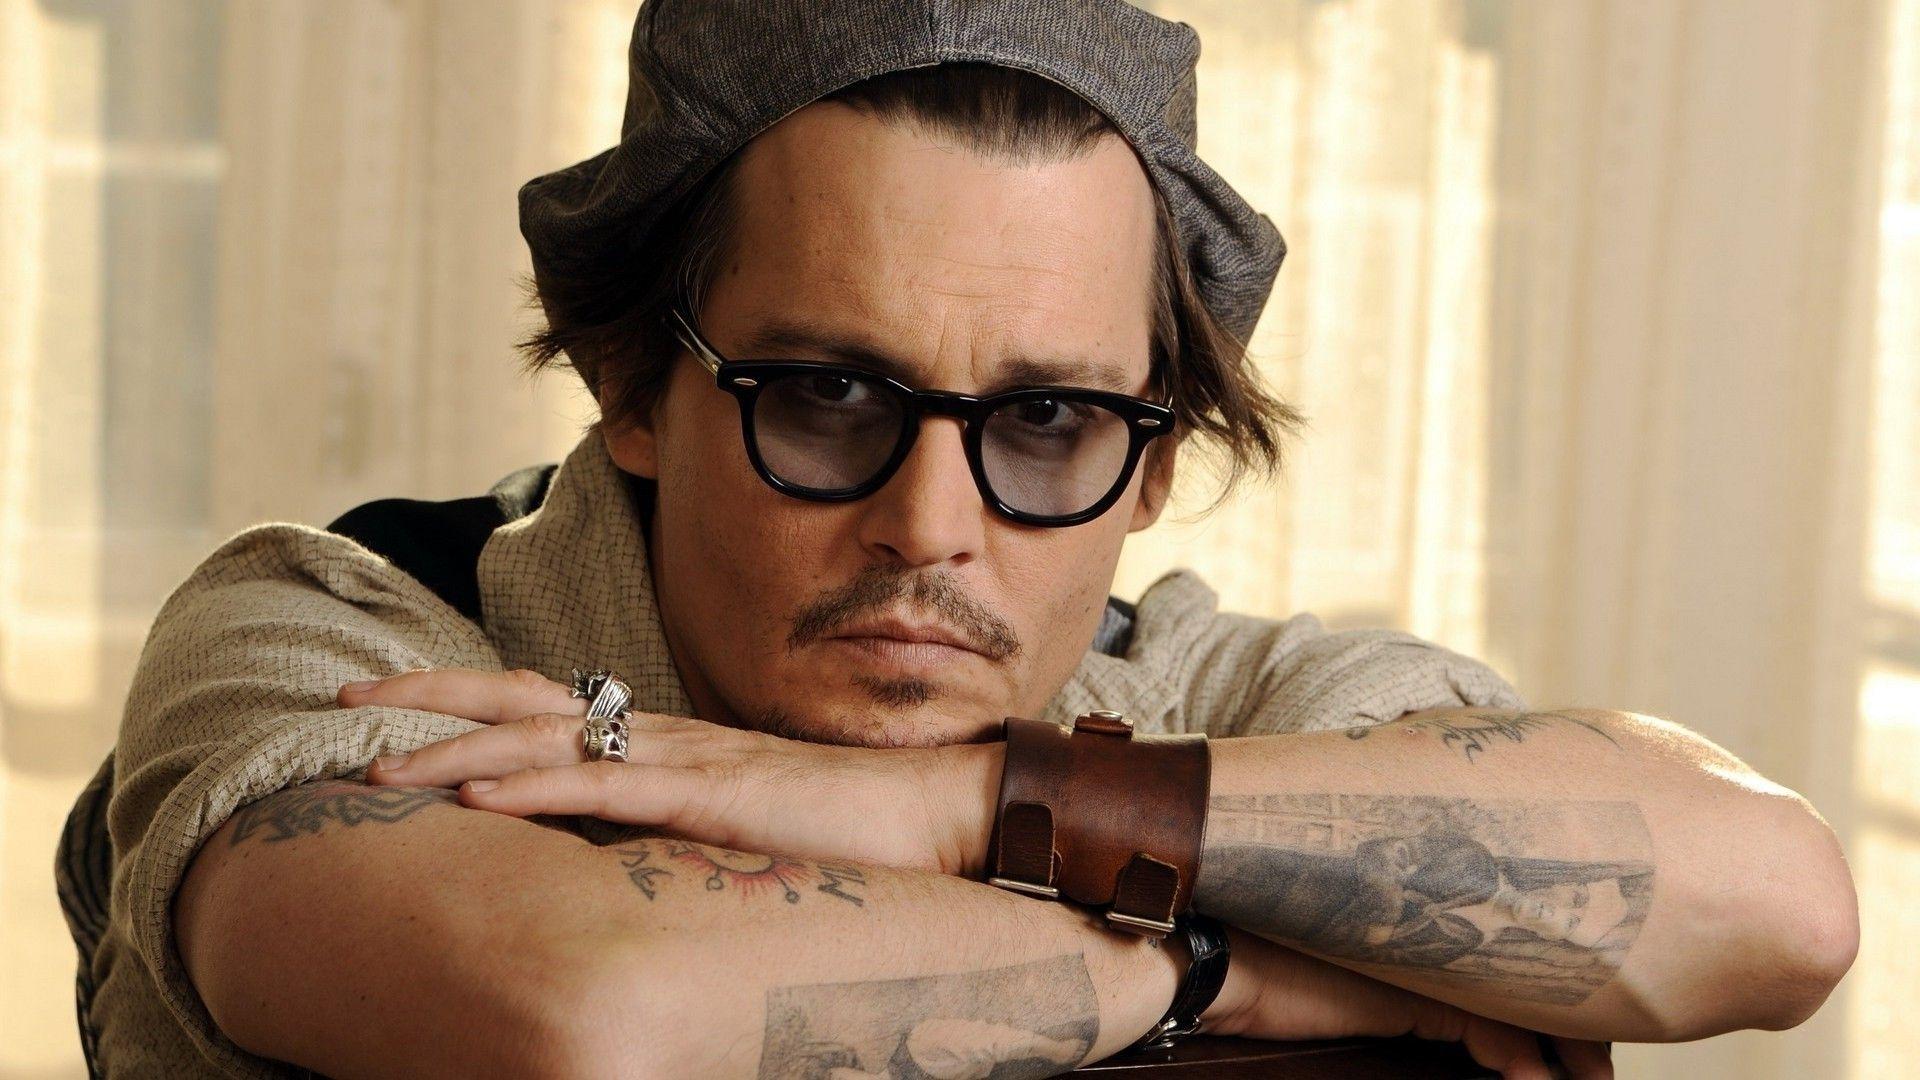 Awesome HD Wallpaper of Johnny Depp Hollywood Celebrity